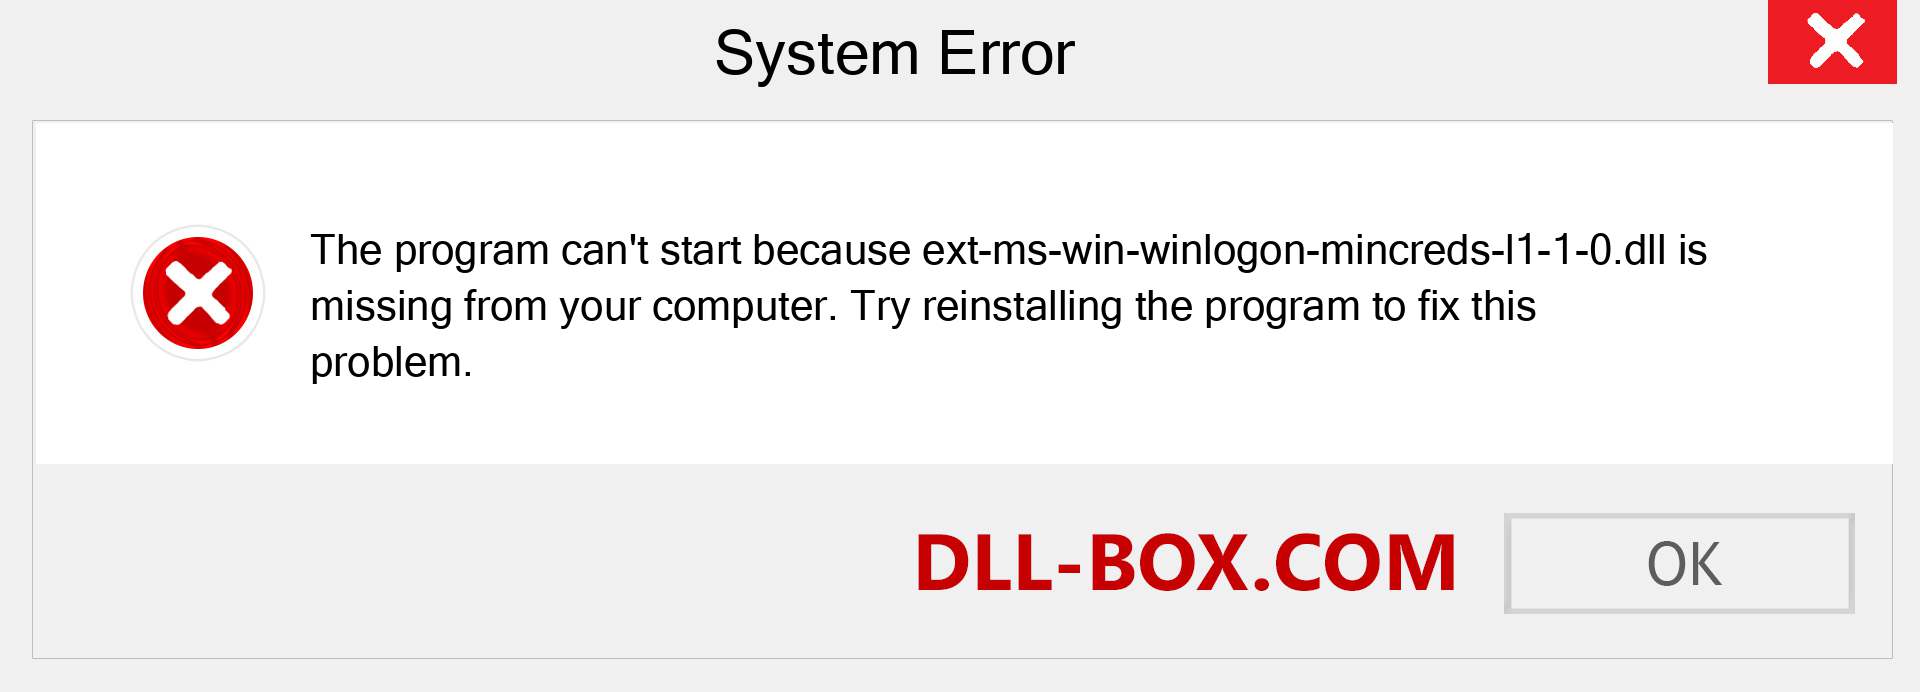  ext-ms-win-winlogon-mincreds-l1-1-0.dll file is missing?. Download for Windows 7, 8, 10 - Fix  ext-ms-win-winlogon-mincreds-l1-1-0 dll Missing Error on Windows, photos, images